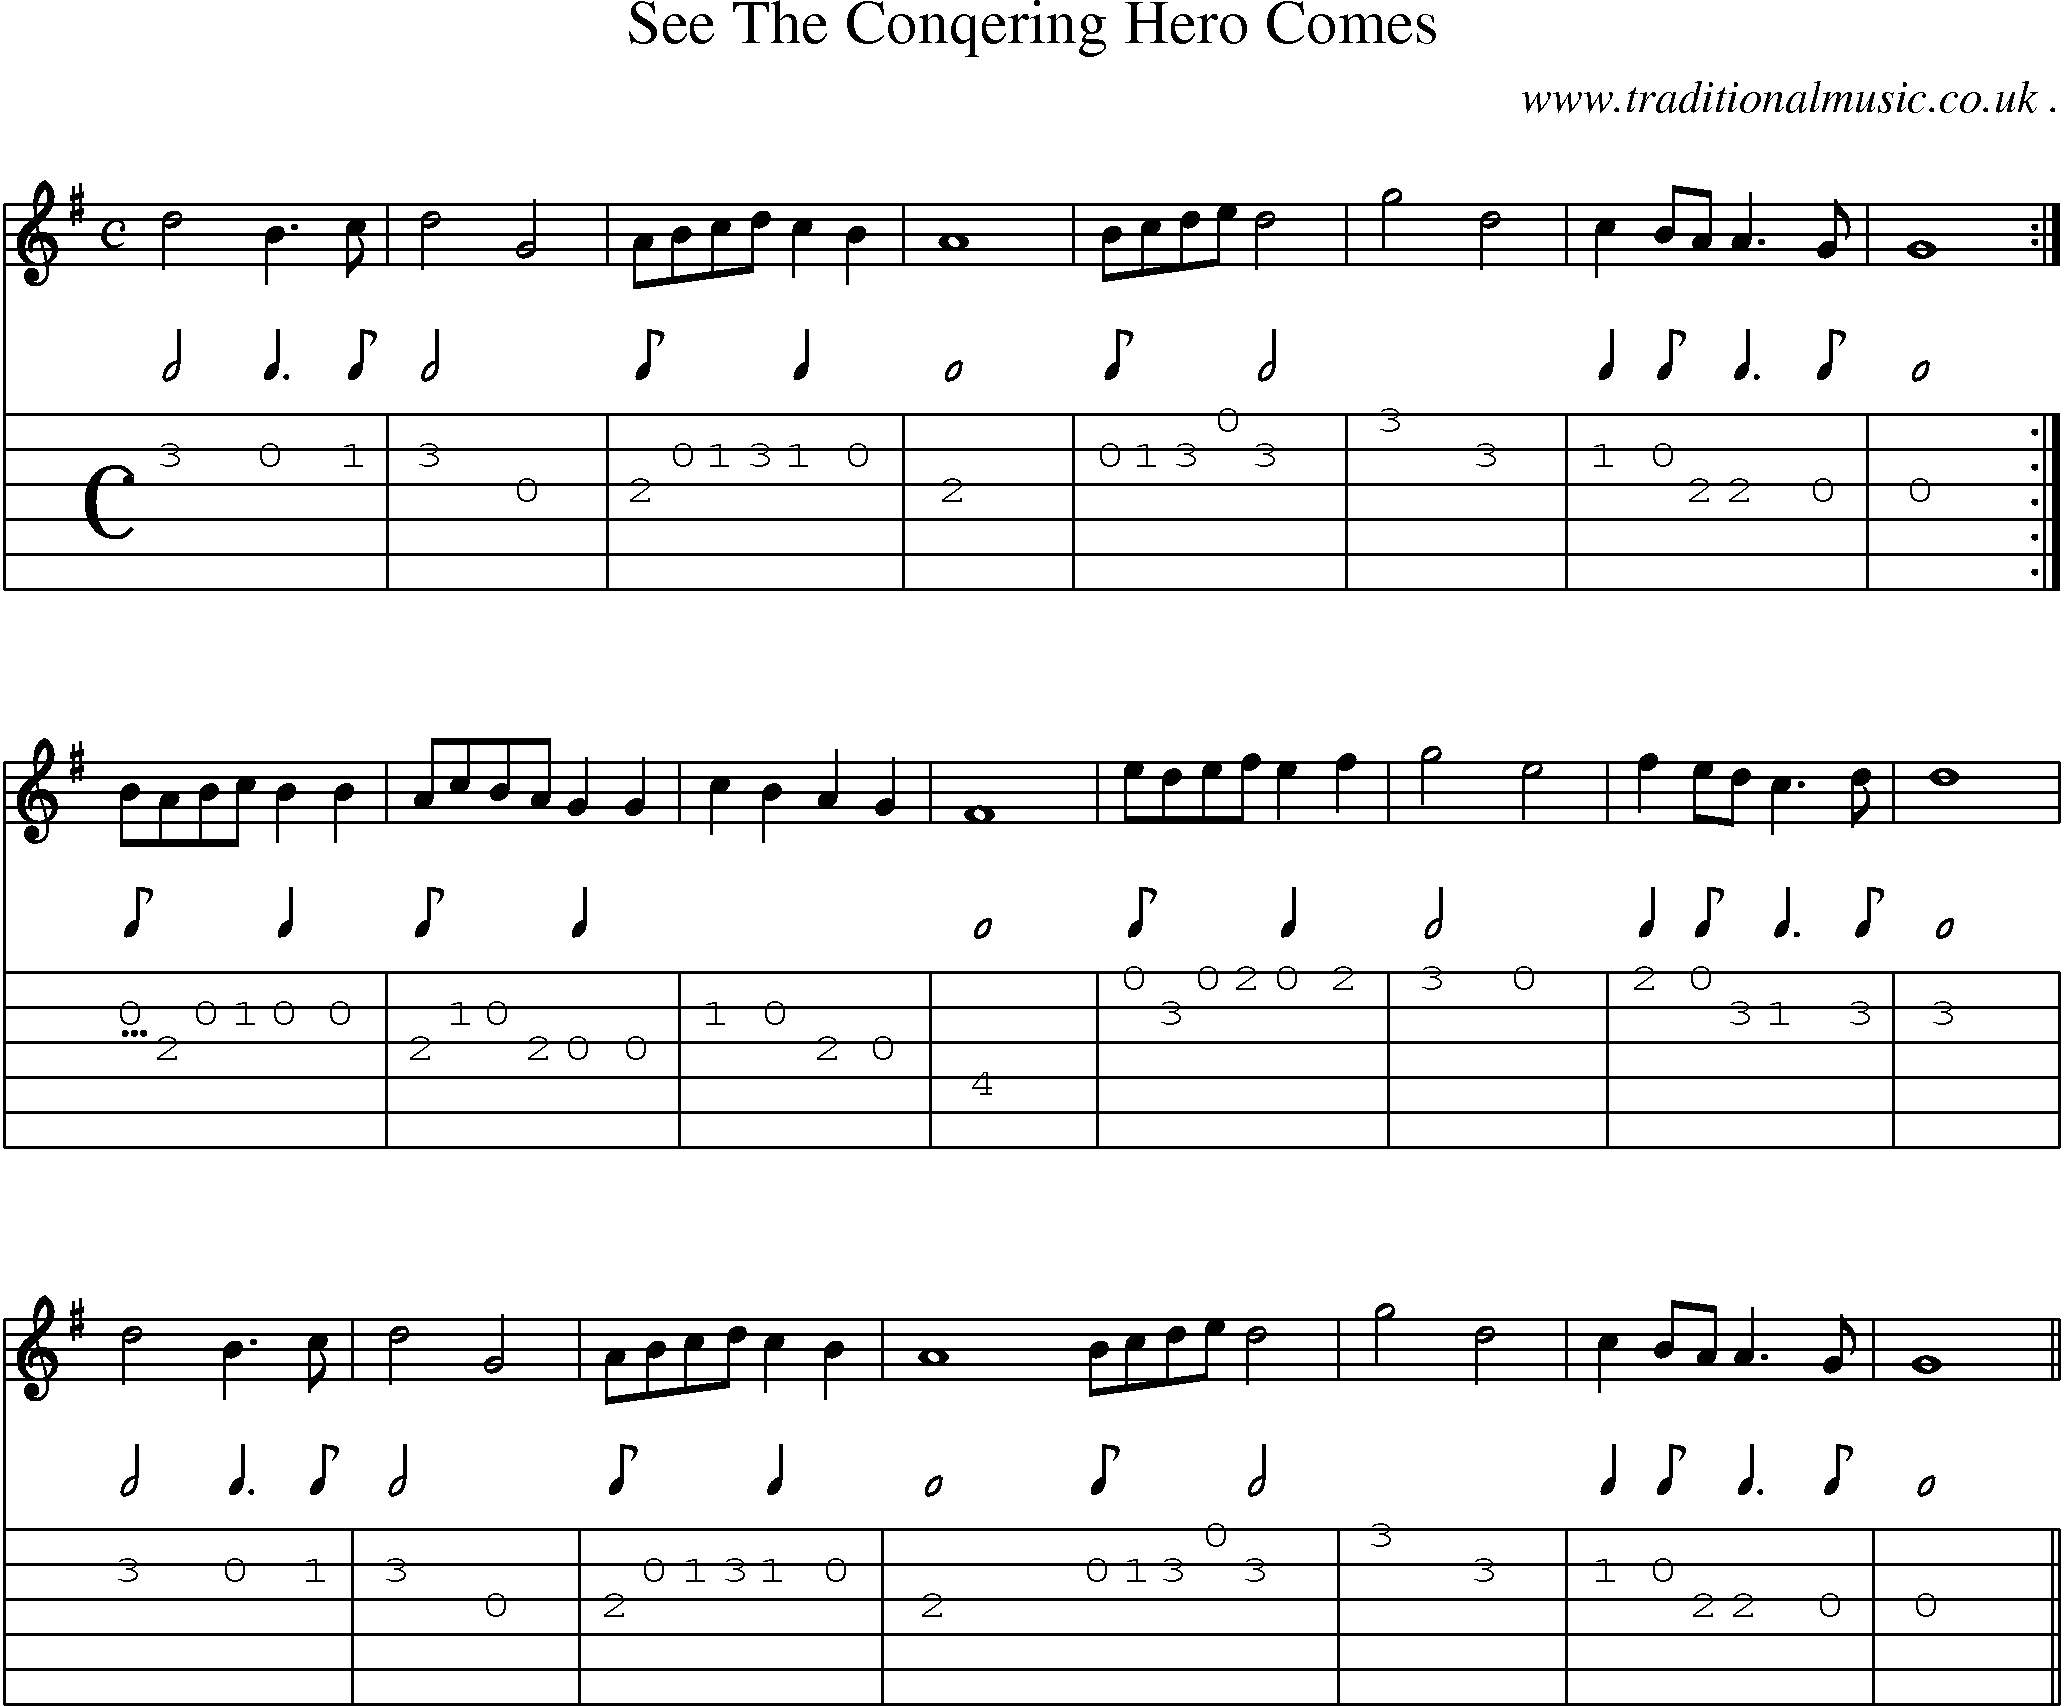 Sheet-Music and Guitar Tabs for See The Conqering Hero Comes